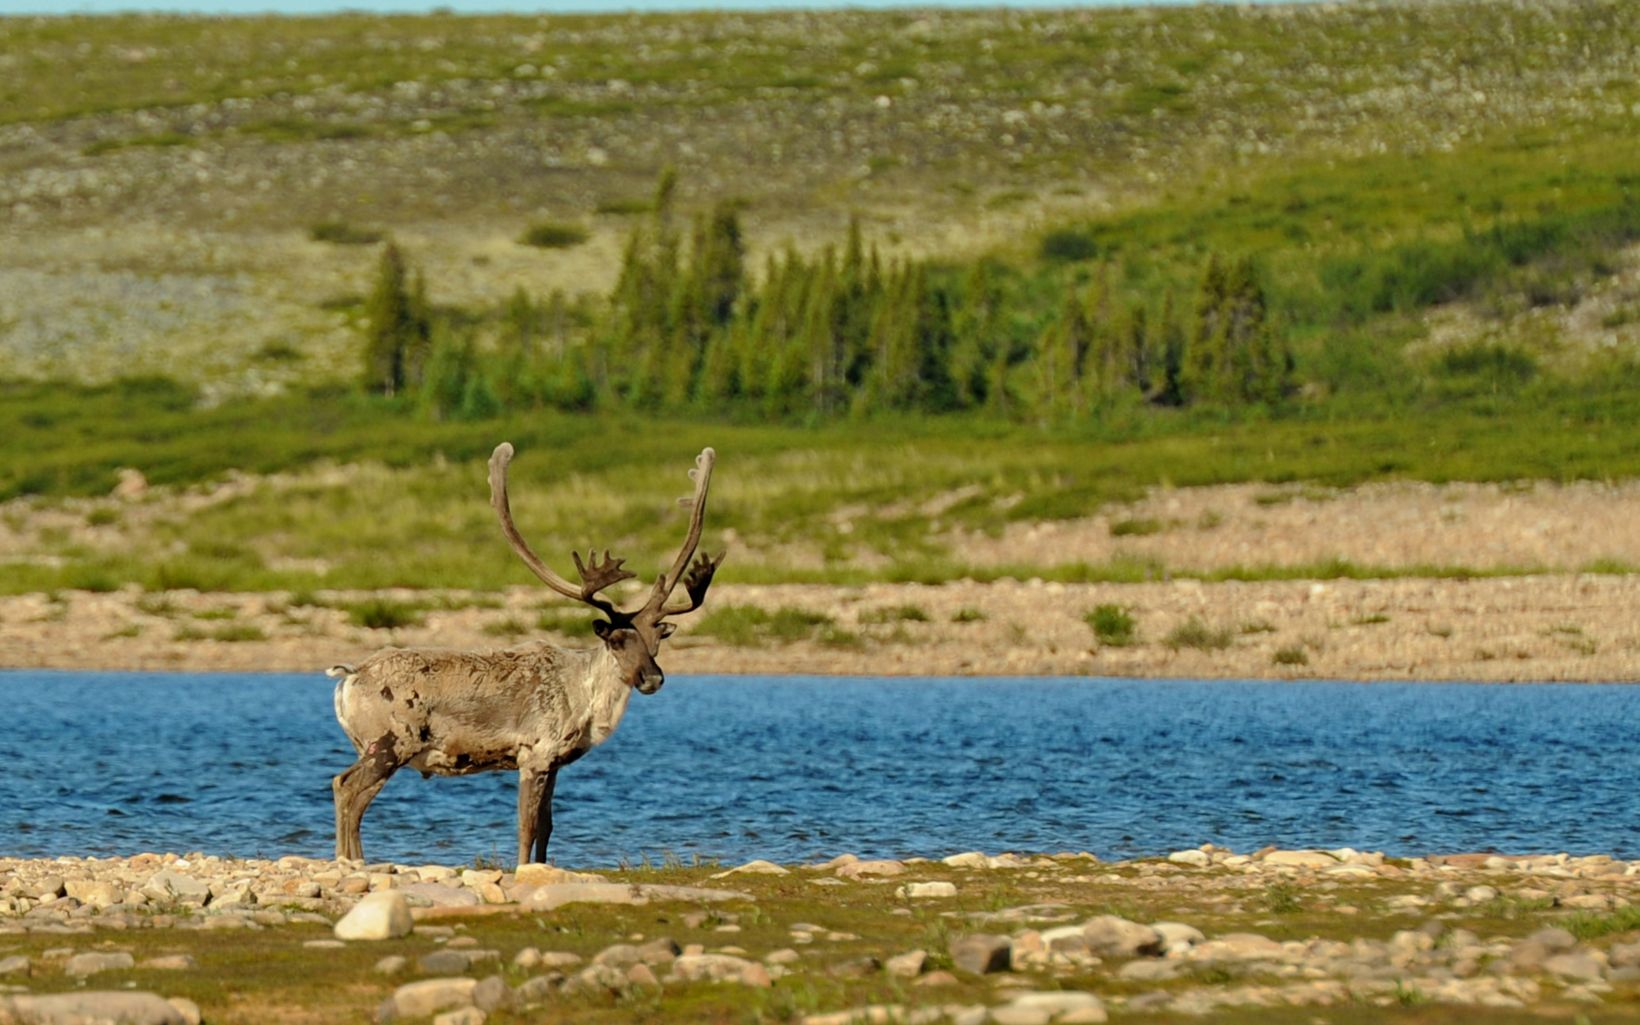 
                
                  Habitat for Endangered Species Protecting and restoring peatlands and other eco-systems can provide habitat for rare and endangered species like woodland caribou. Photo
                  © Ami Vitale
                
              